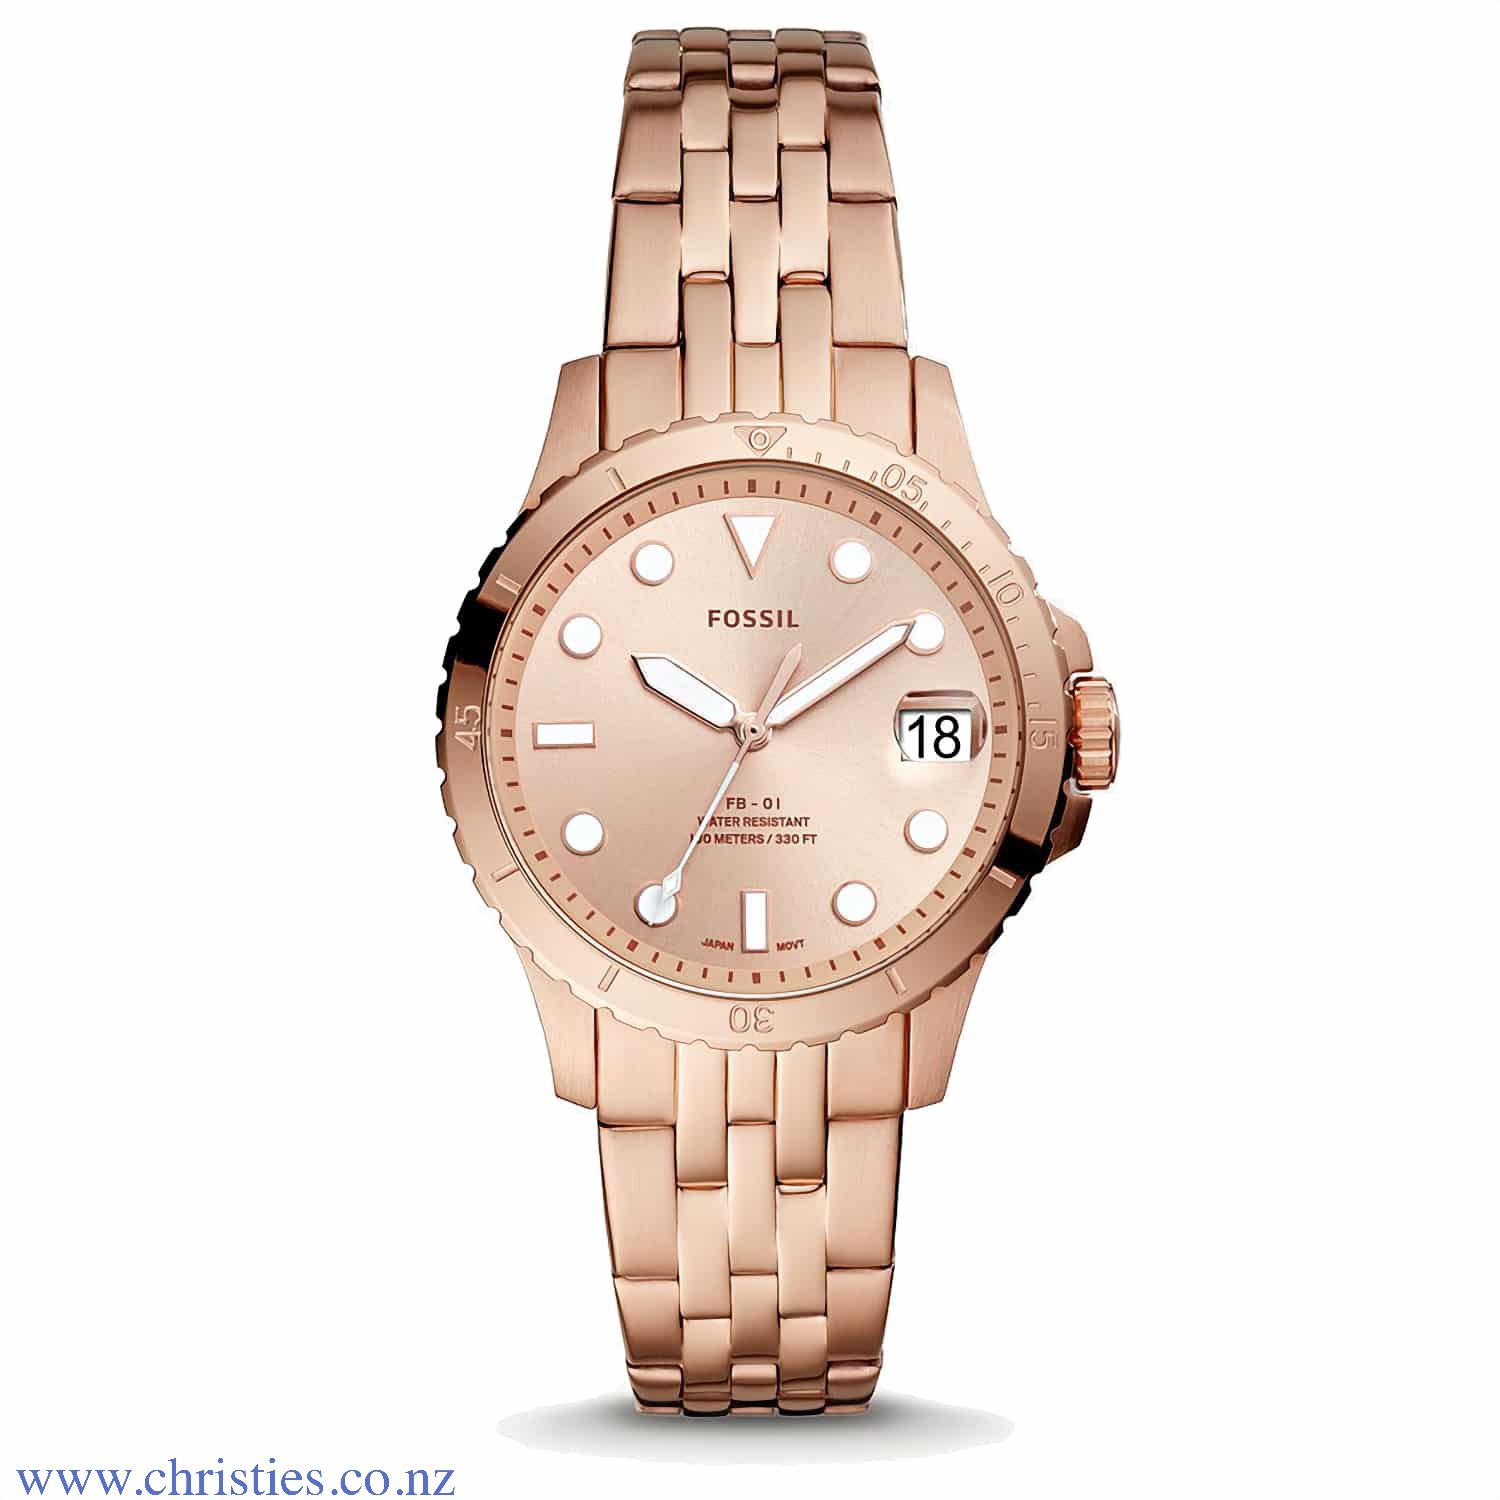 ES4748 Fossil FB-01 Rose Gold-Tone Watch. ES4748 Fossil FB-01 Three-Hand Date Rose Gold-Tone Stainless Steel Watch Afterpay - Split your purchase into 4 instalments - Pay for your purchase over 4 instalments, due every two weeks. You’ll pay your first fos